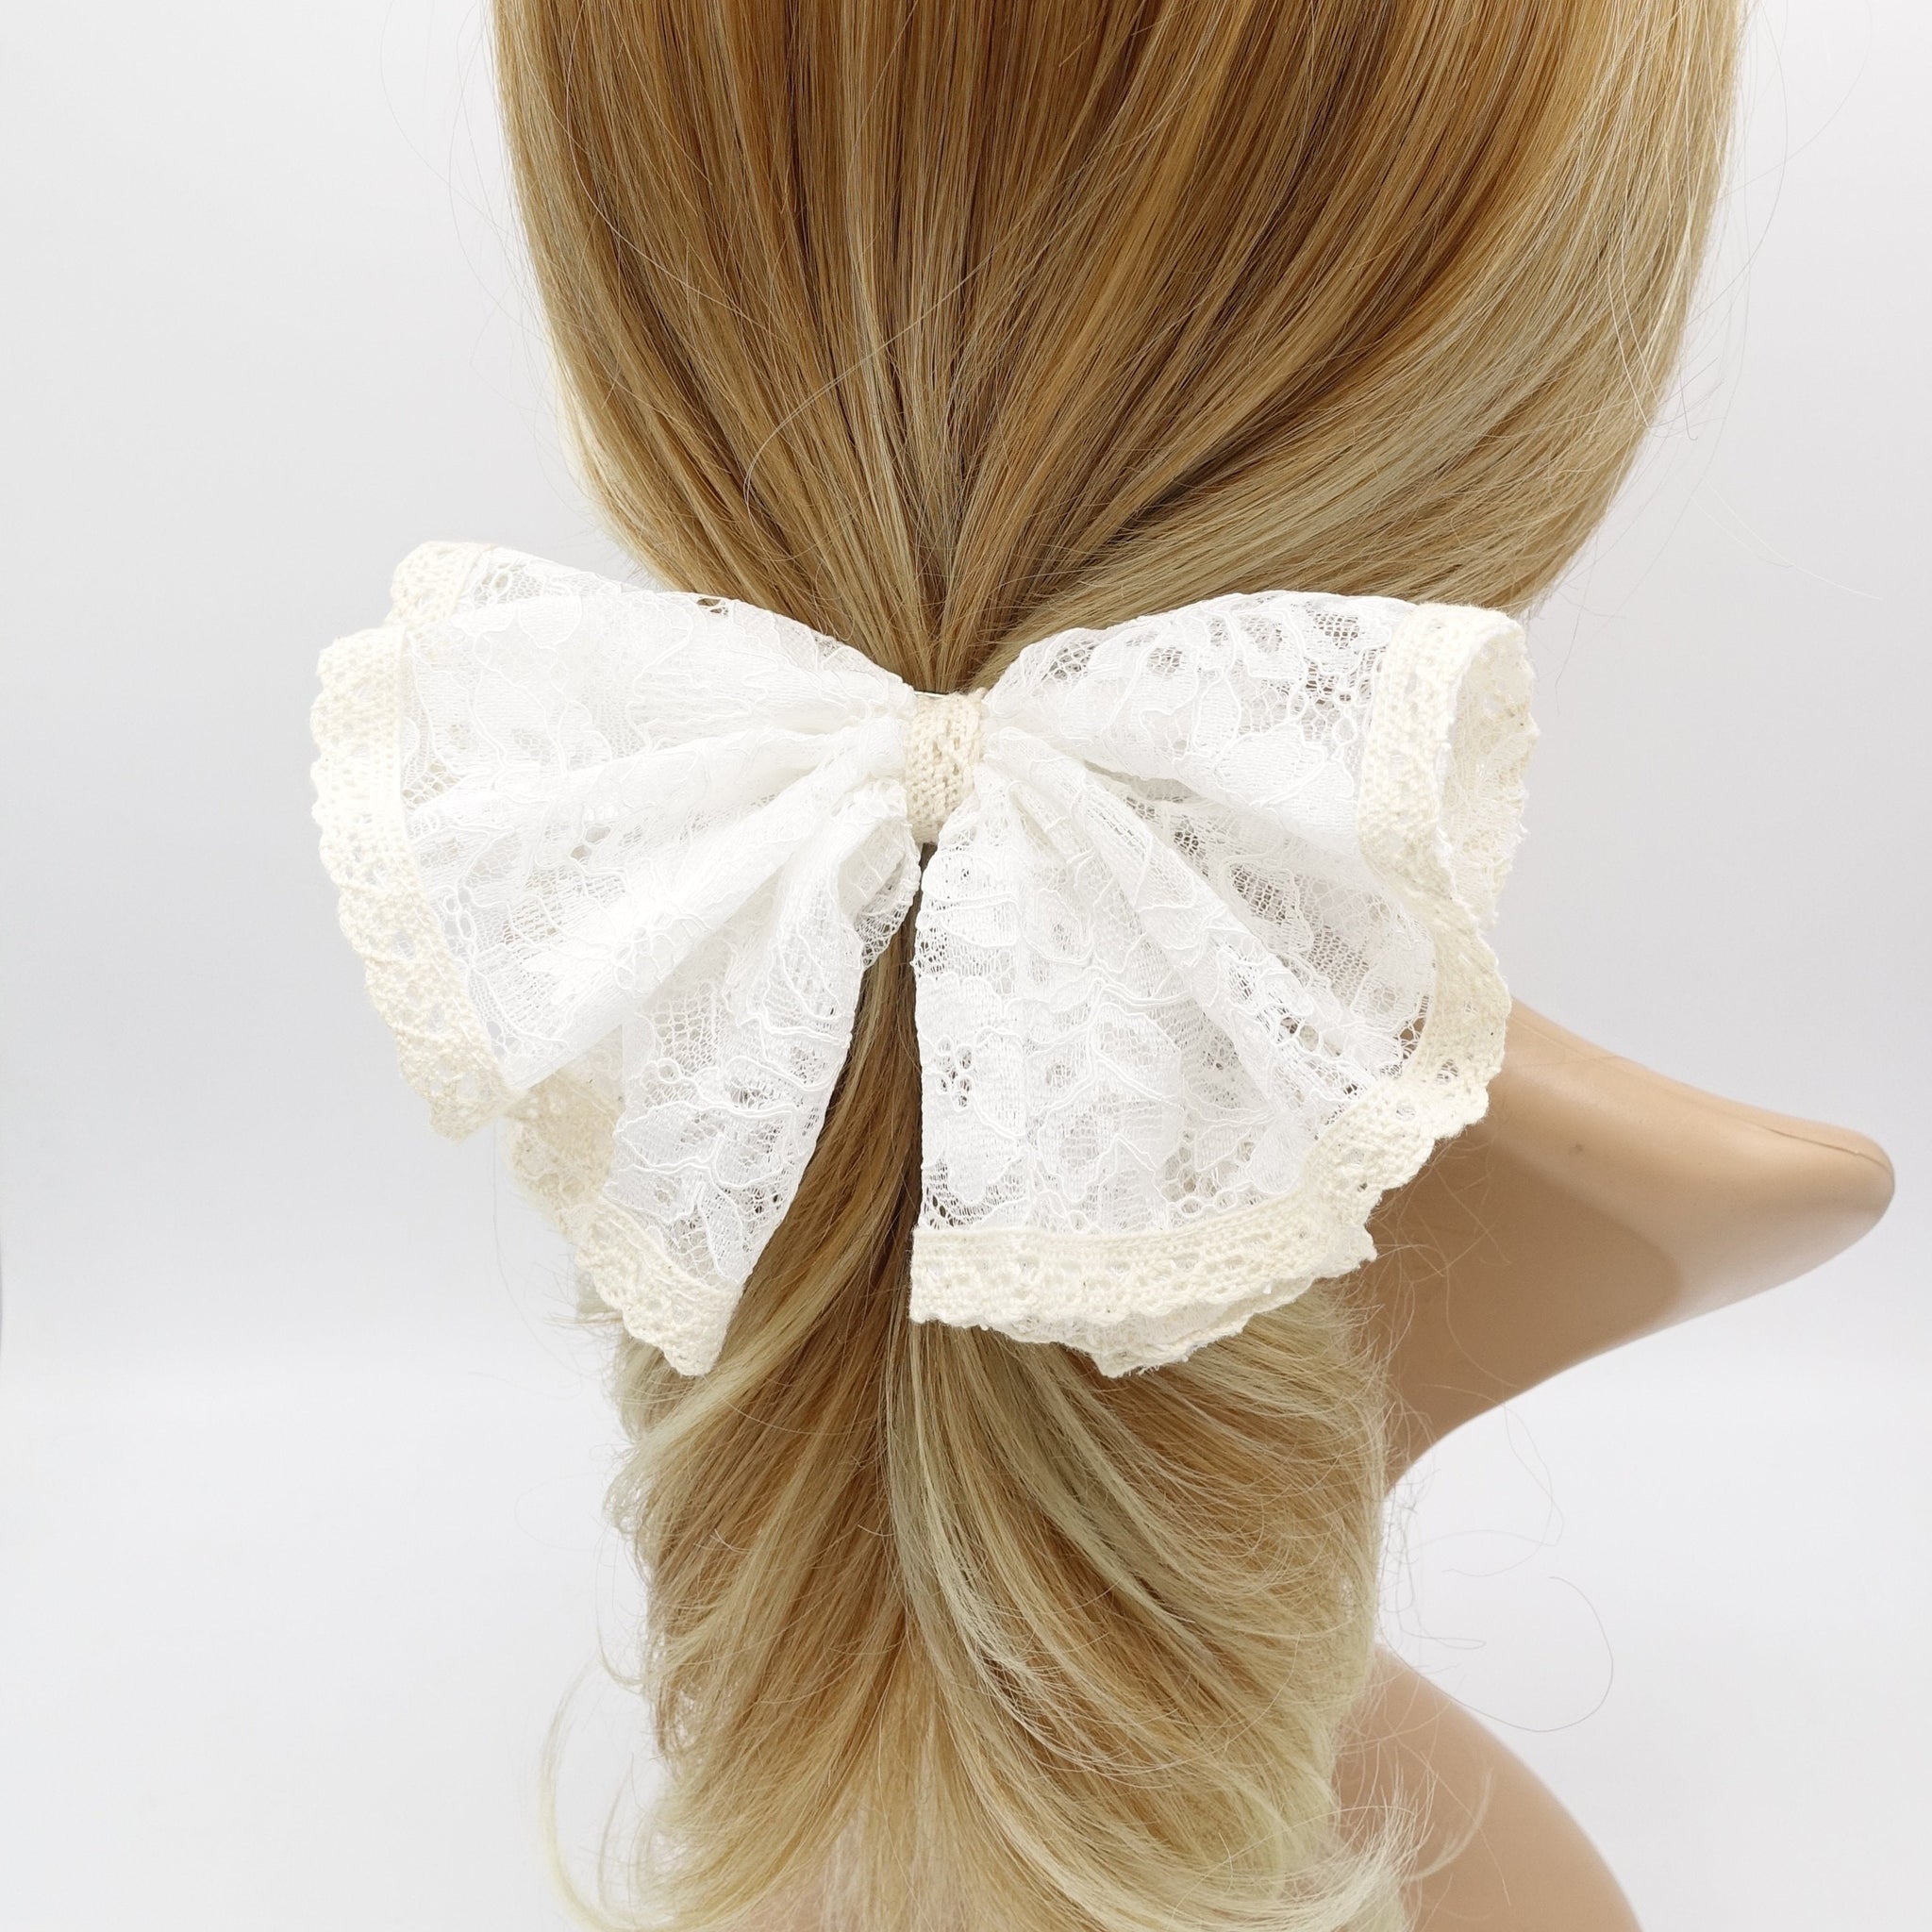 VeryShine Hair Accessories White two tone floral lace hair bow layered hair accessory for women